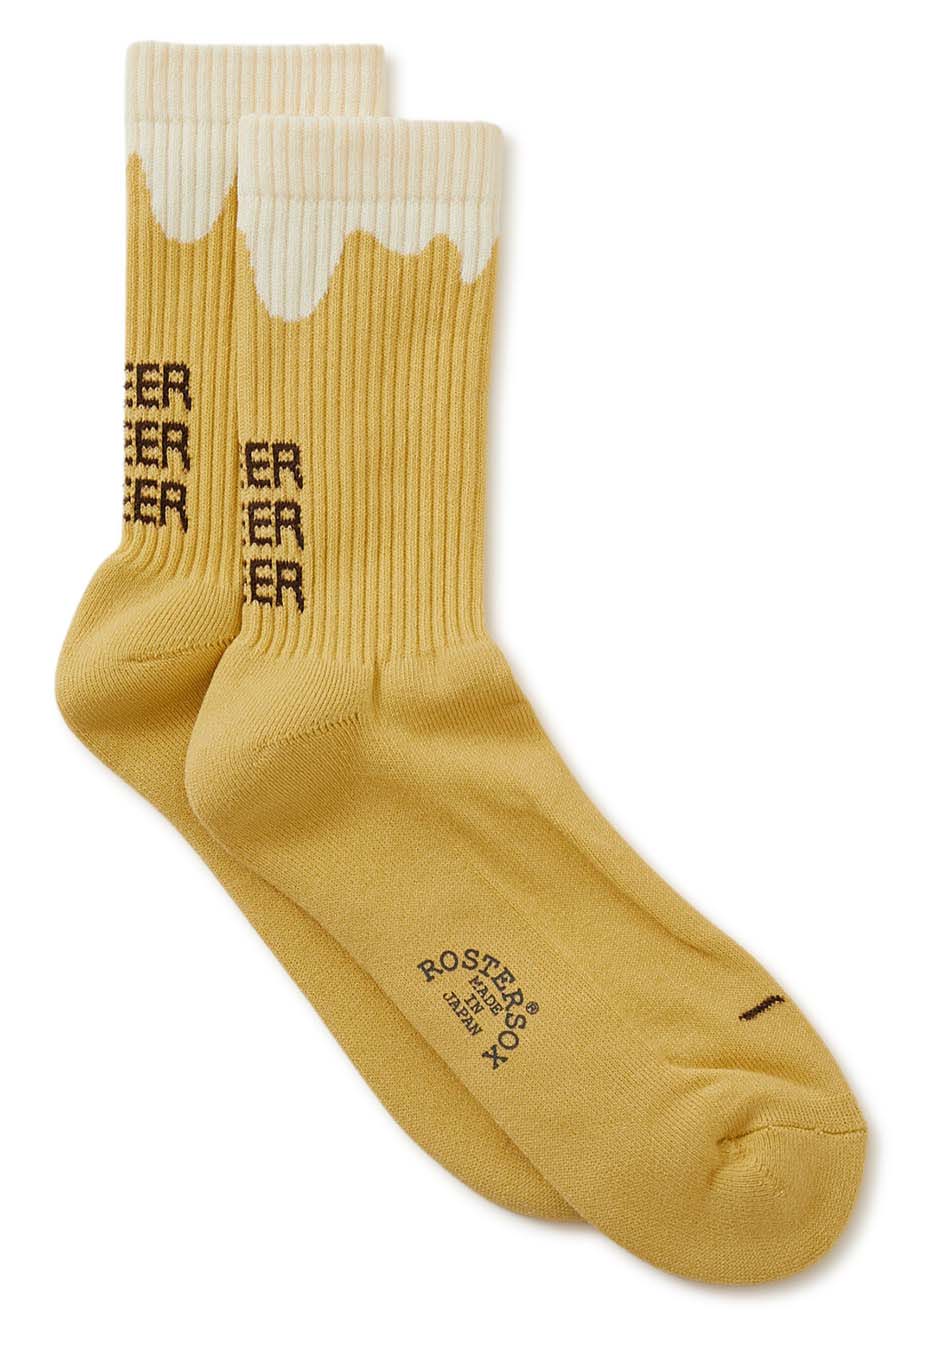 ROSTERSOX BEER RS-349 ソックス